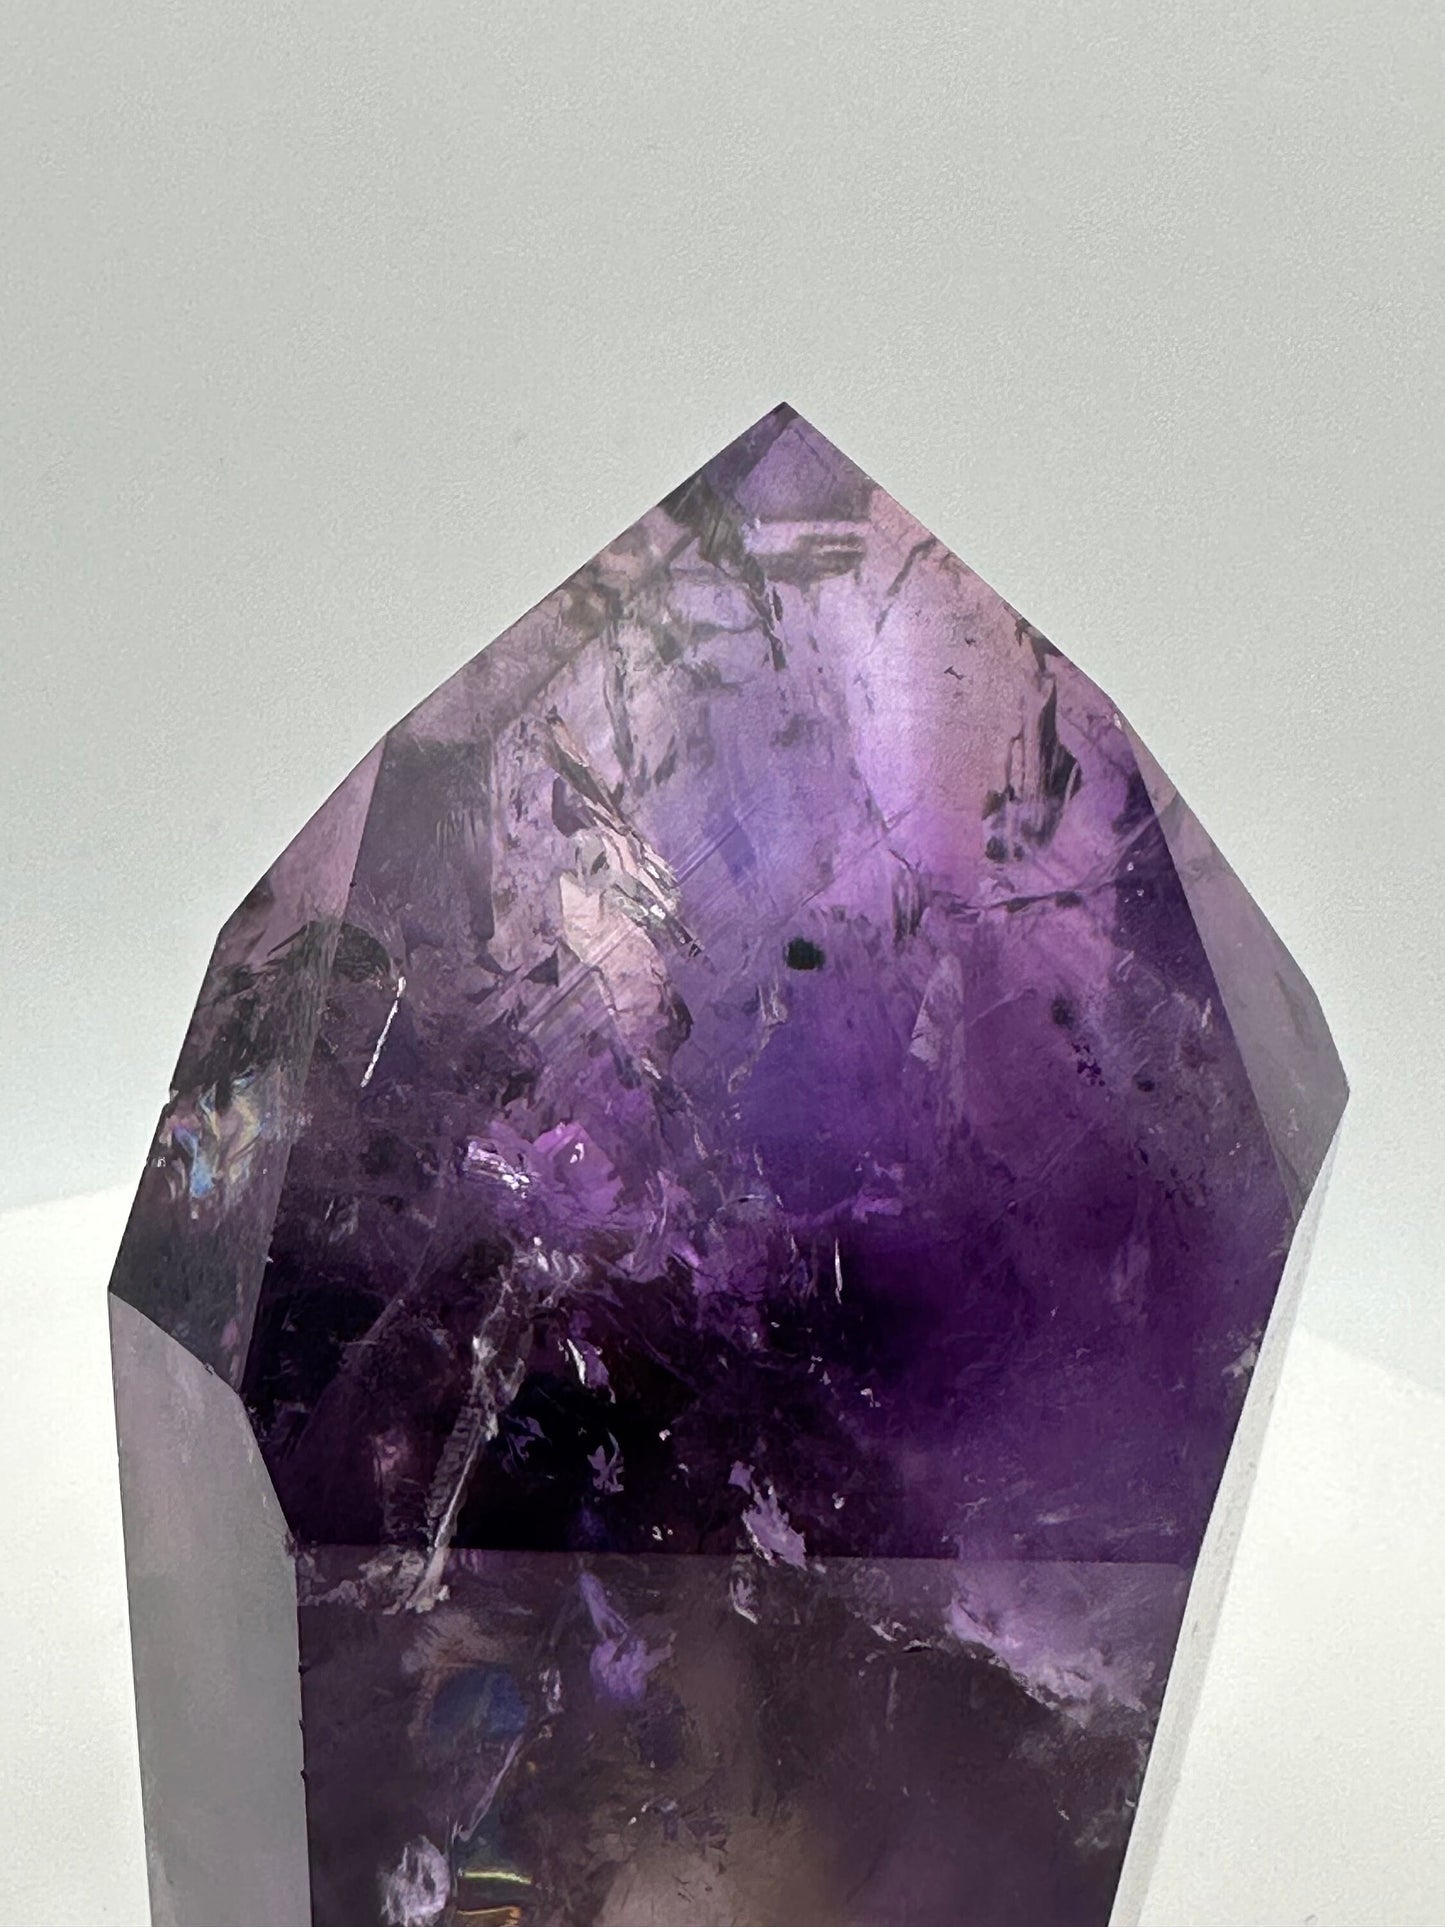 Gorgeous Amethyst Quartz Tower With Phantom & Hollandite Inclusions High-Quality Crystal From Brazil